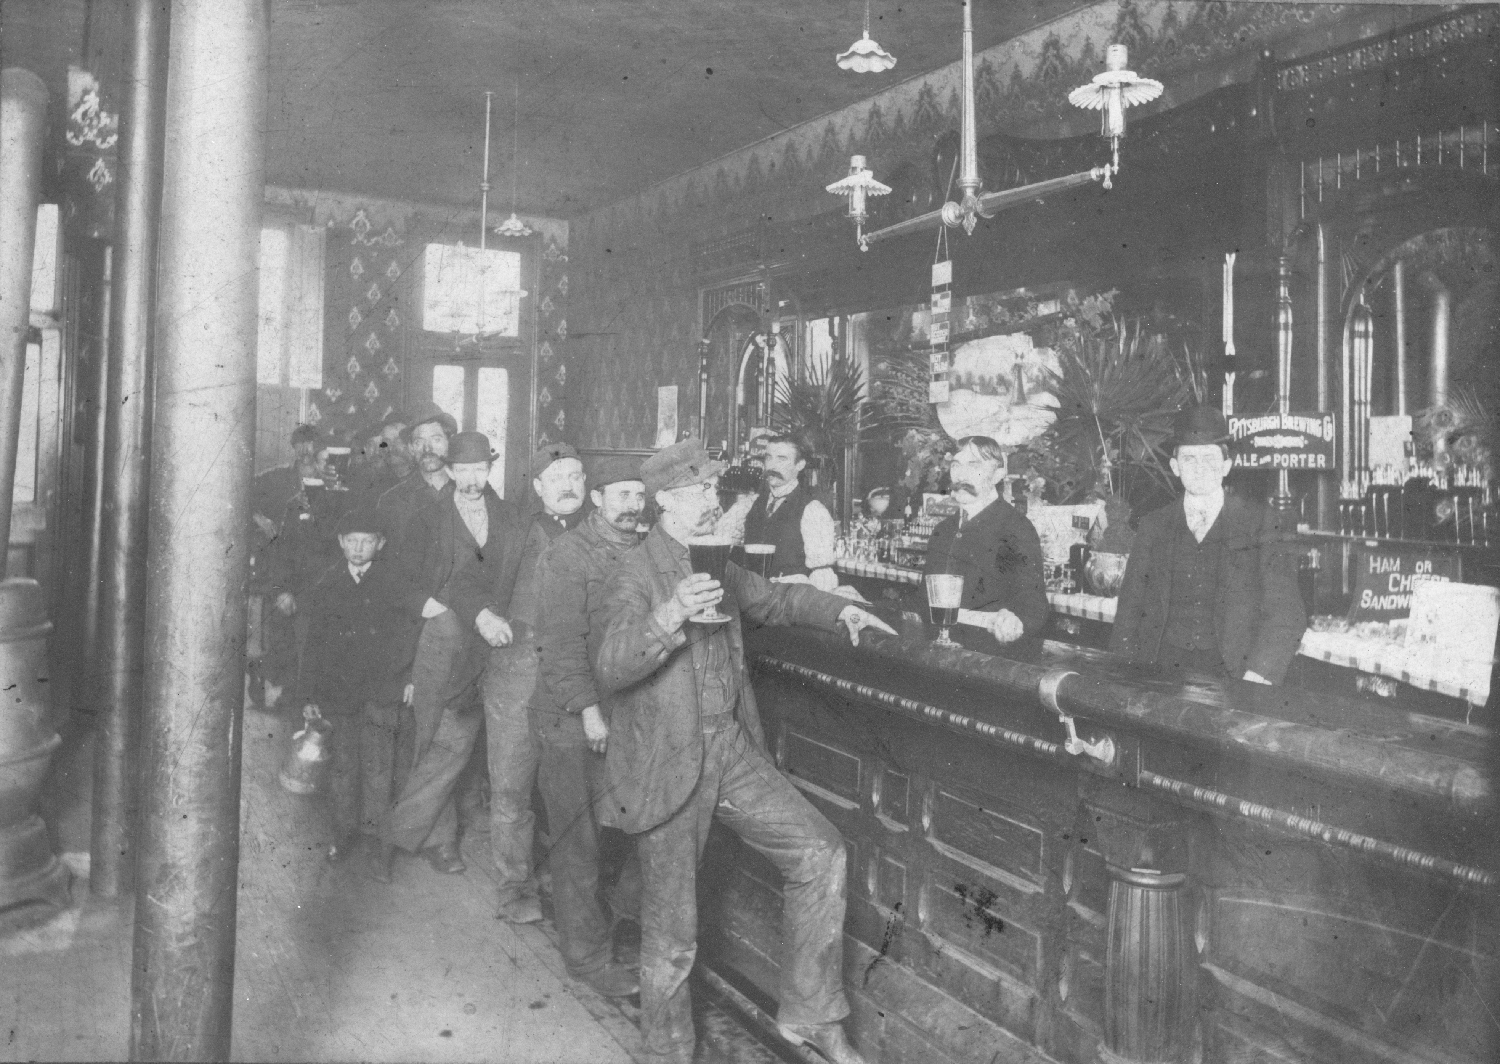 Waiting in line for a beer at a Pittsburgh saloon, c. 1910. General Photo Collection, Detre Library & Archives, Heinz History Center.